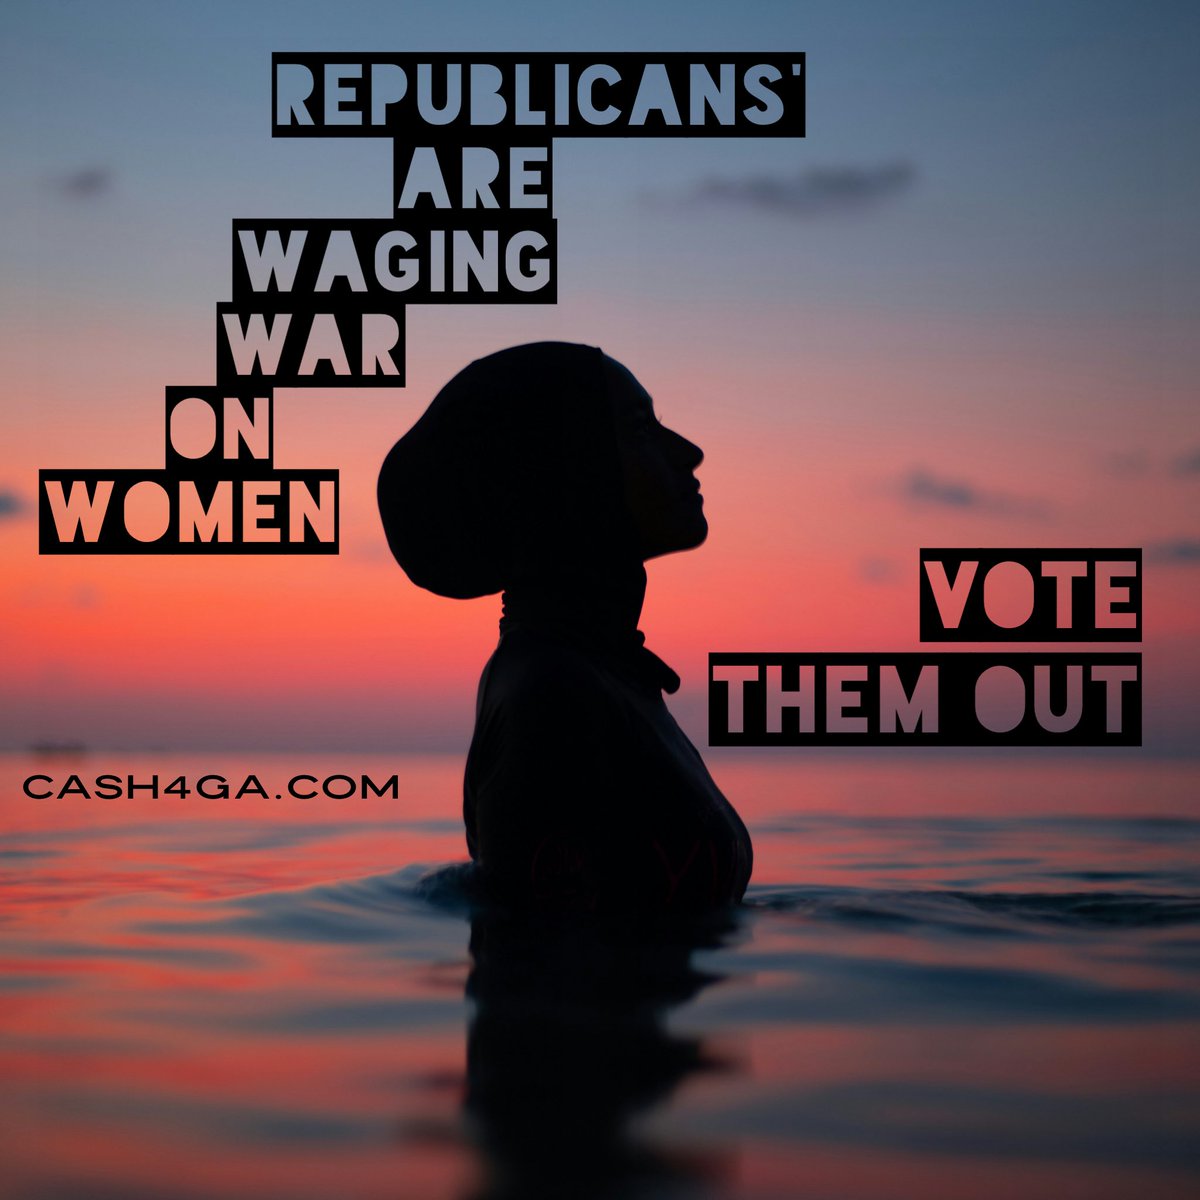 Early voting in GA has begun. Republicans are pushing to strip away women's rights, targeting reproductive health care. It's time to stand up and fight for bodily autonomy and equality for all. #WomensRights #ReproductiveJustice #EqualityForAll Vote blue cash4ga.com